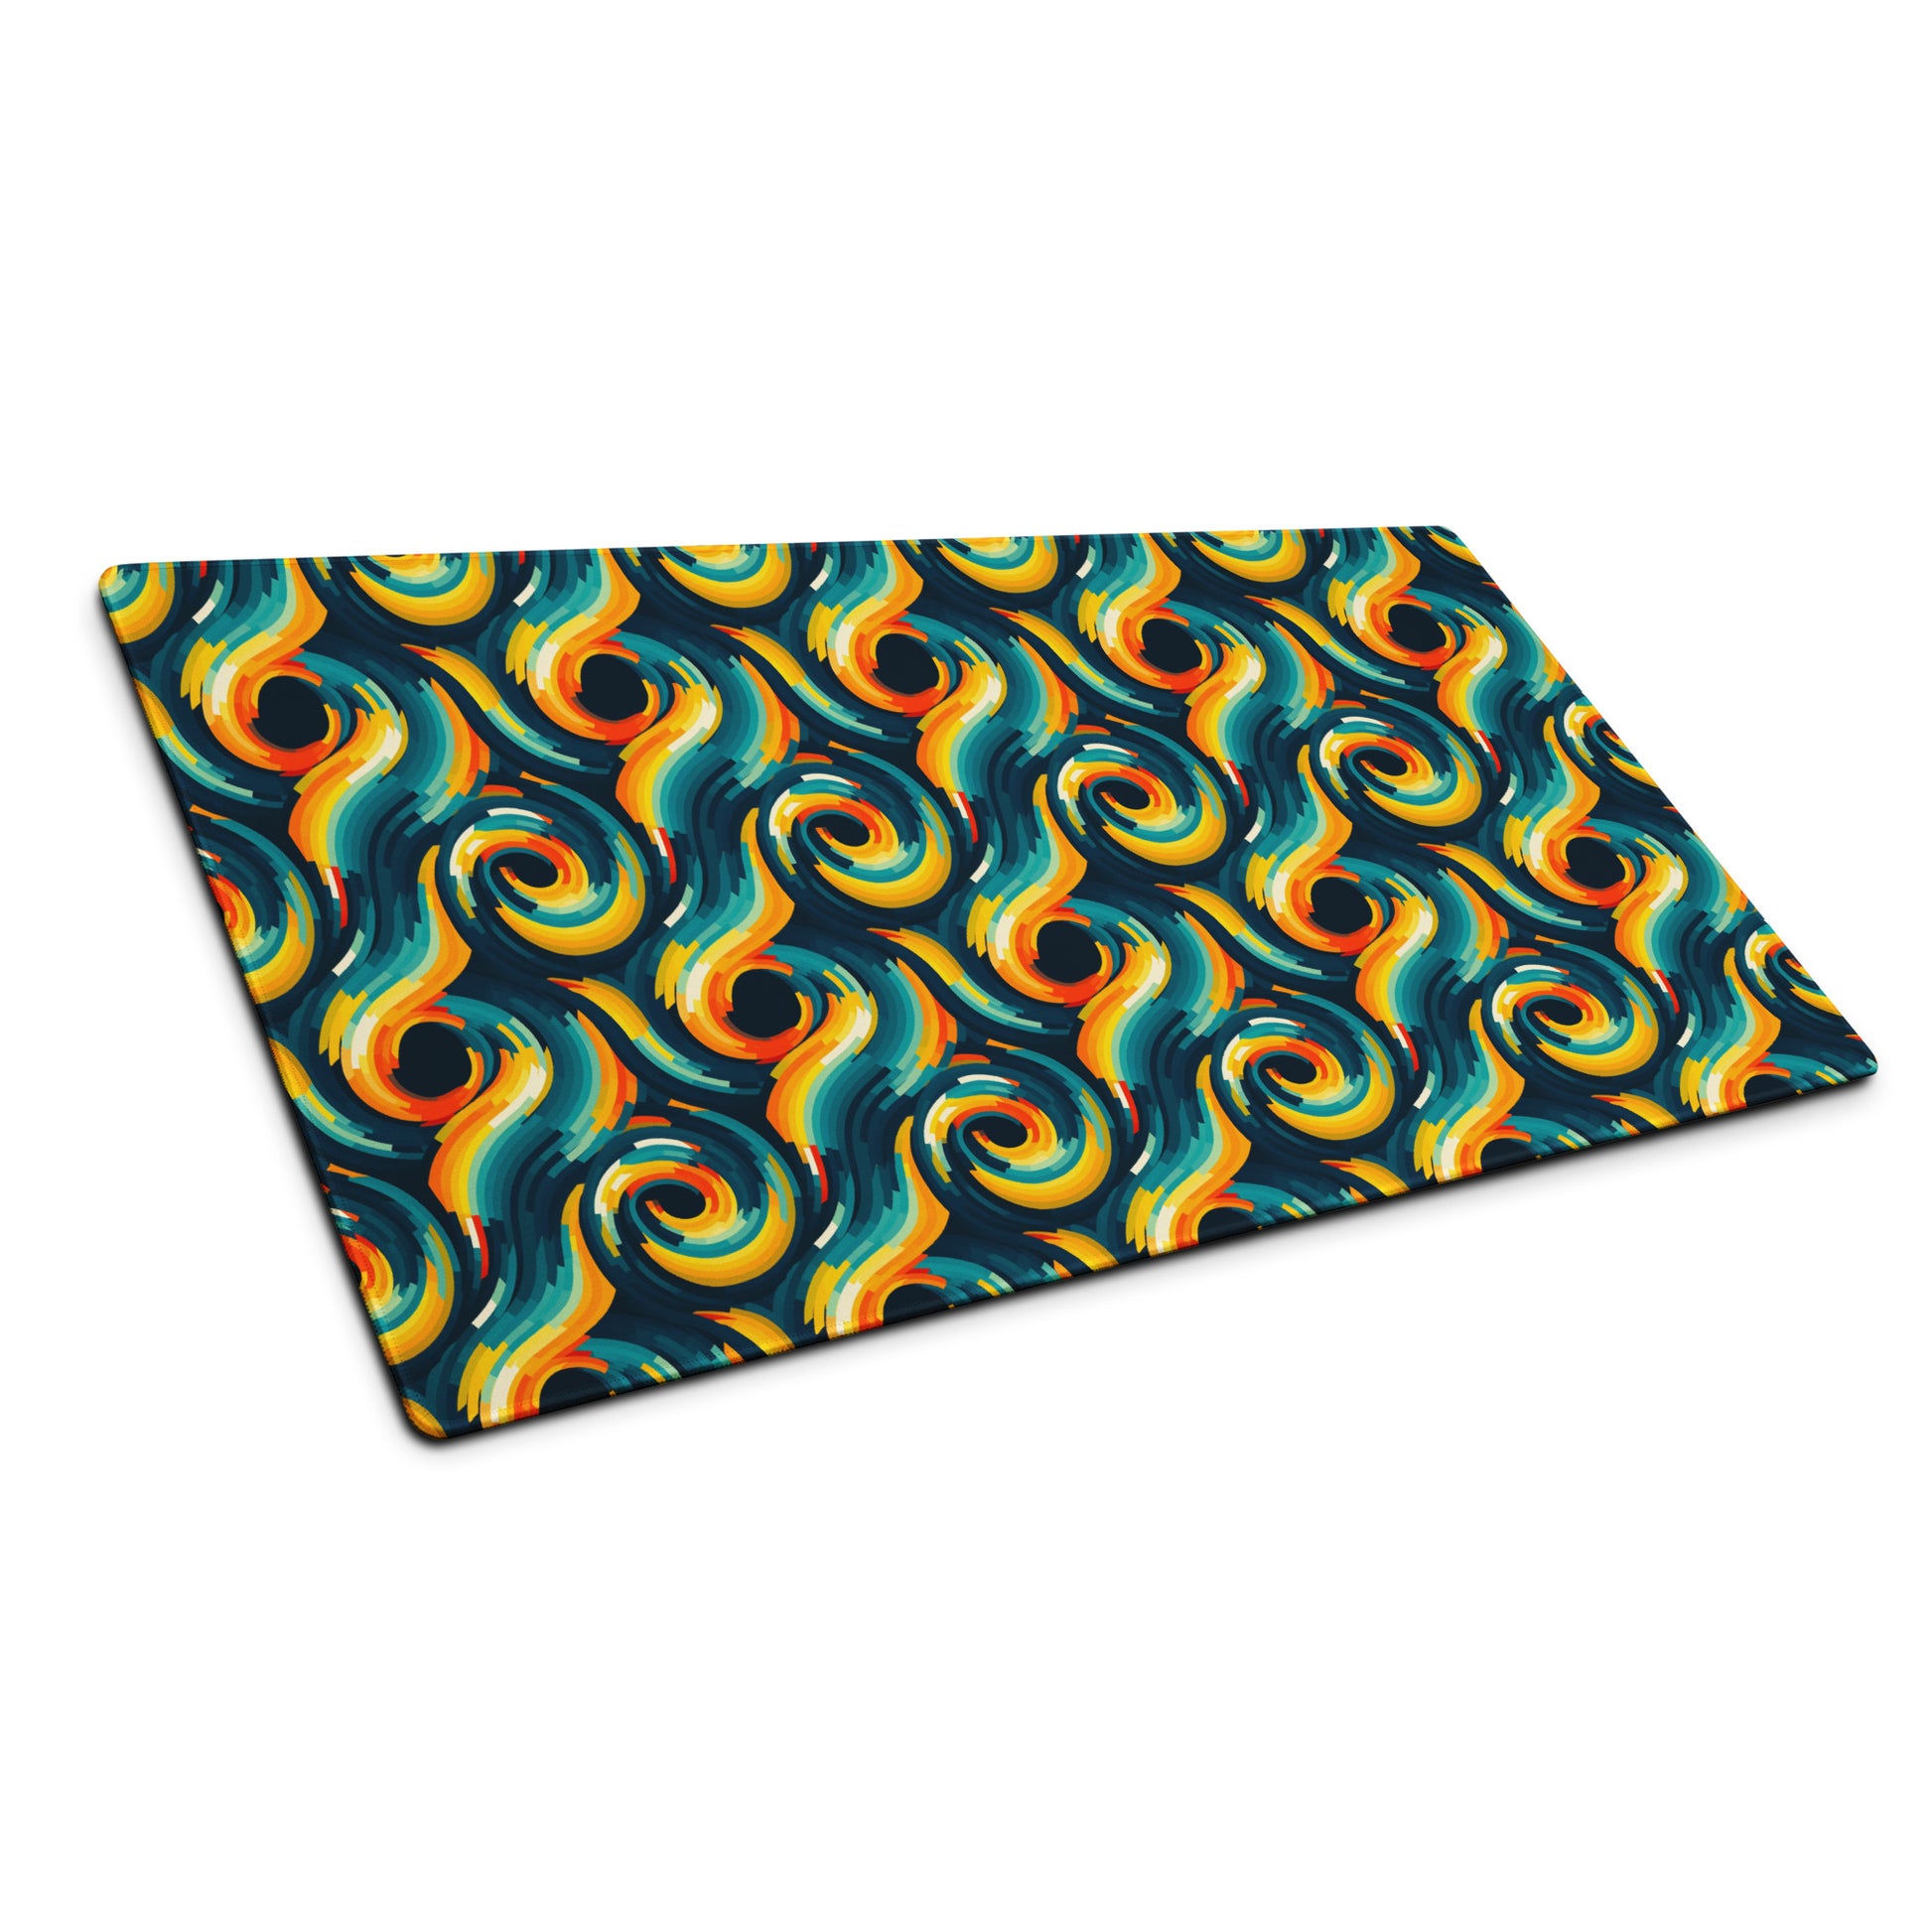  A 36" x 18" desk pad with swirls all over it shown at an angle. Yellow and Blue in color.